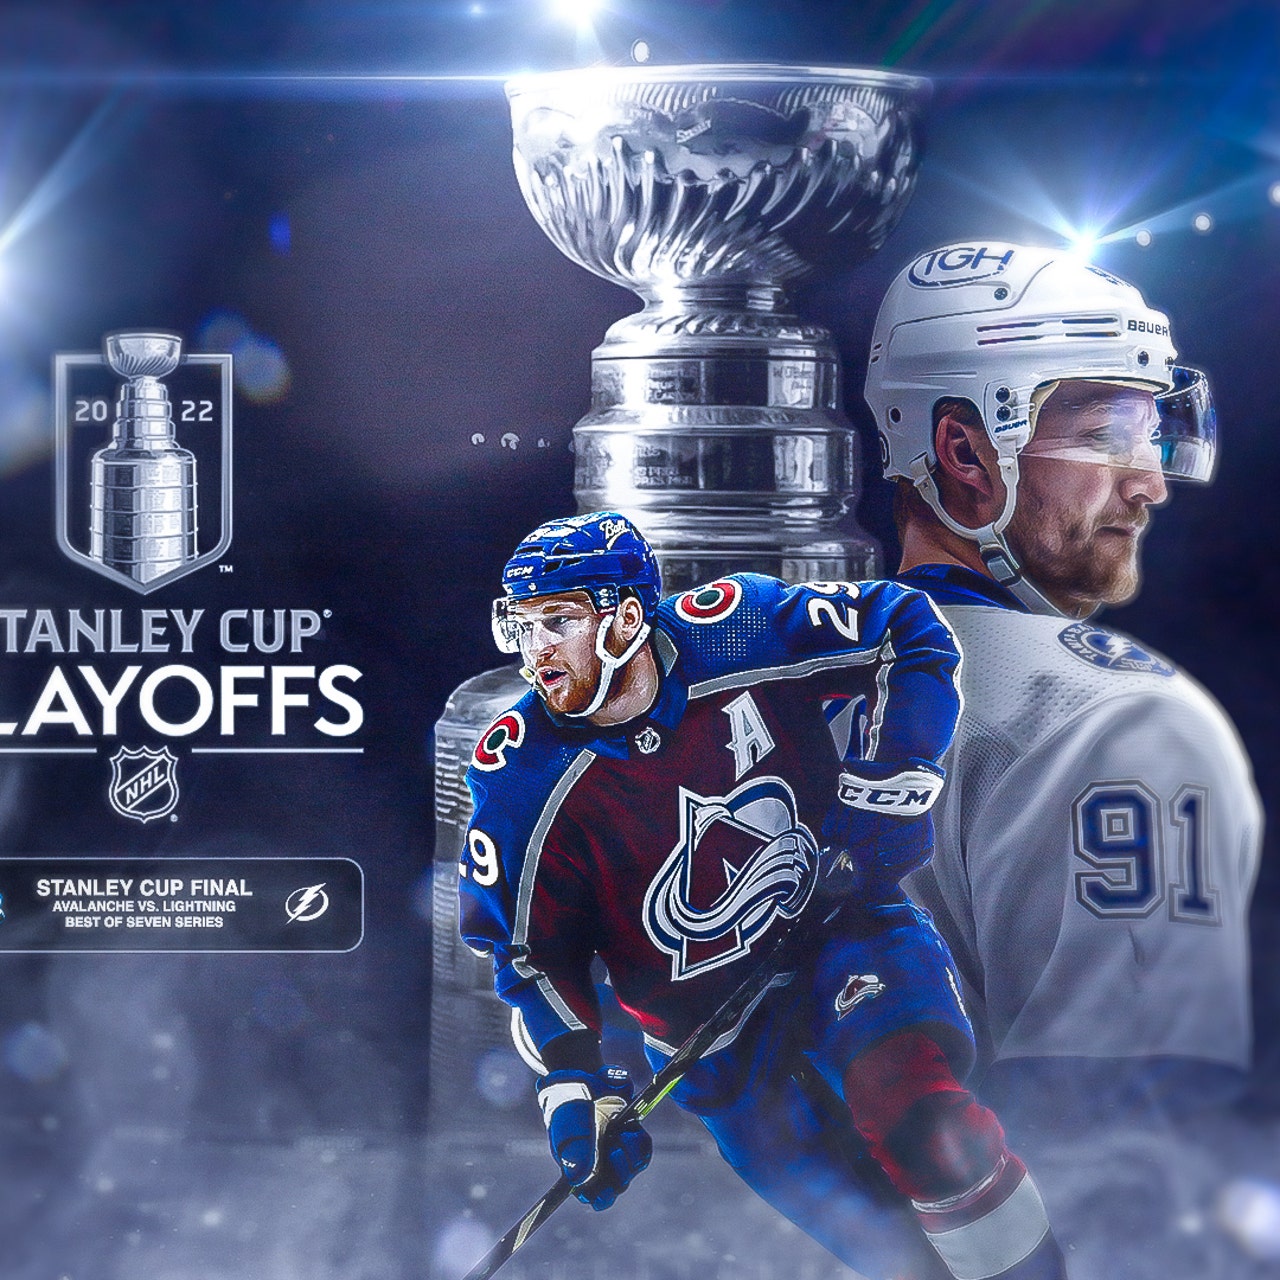 HD wallpaper: NHL, Hockey, Colorado Avalanche, Stanley Cup, French